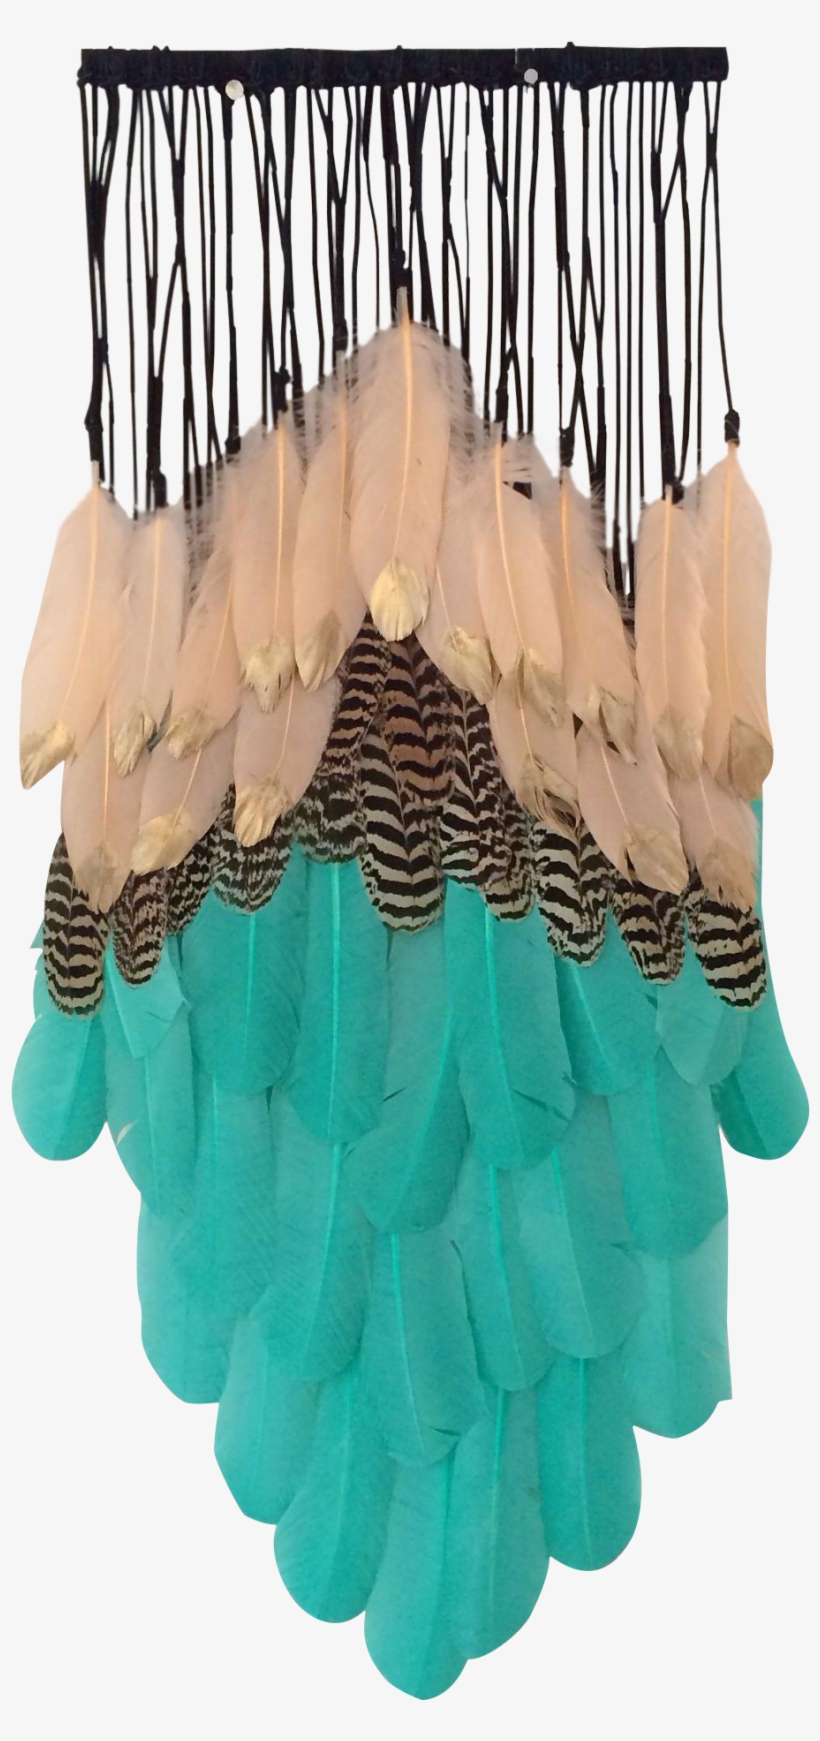 Aqua Green, Mottled Peacock Feathers Plus Peach Feathers - Art, transparent png #6426431